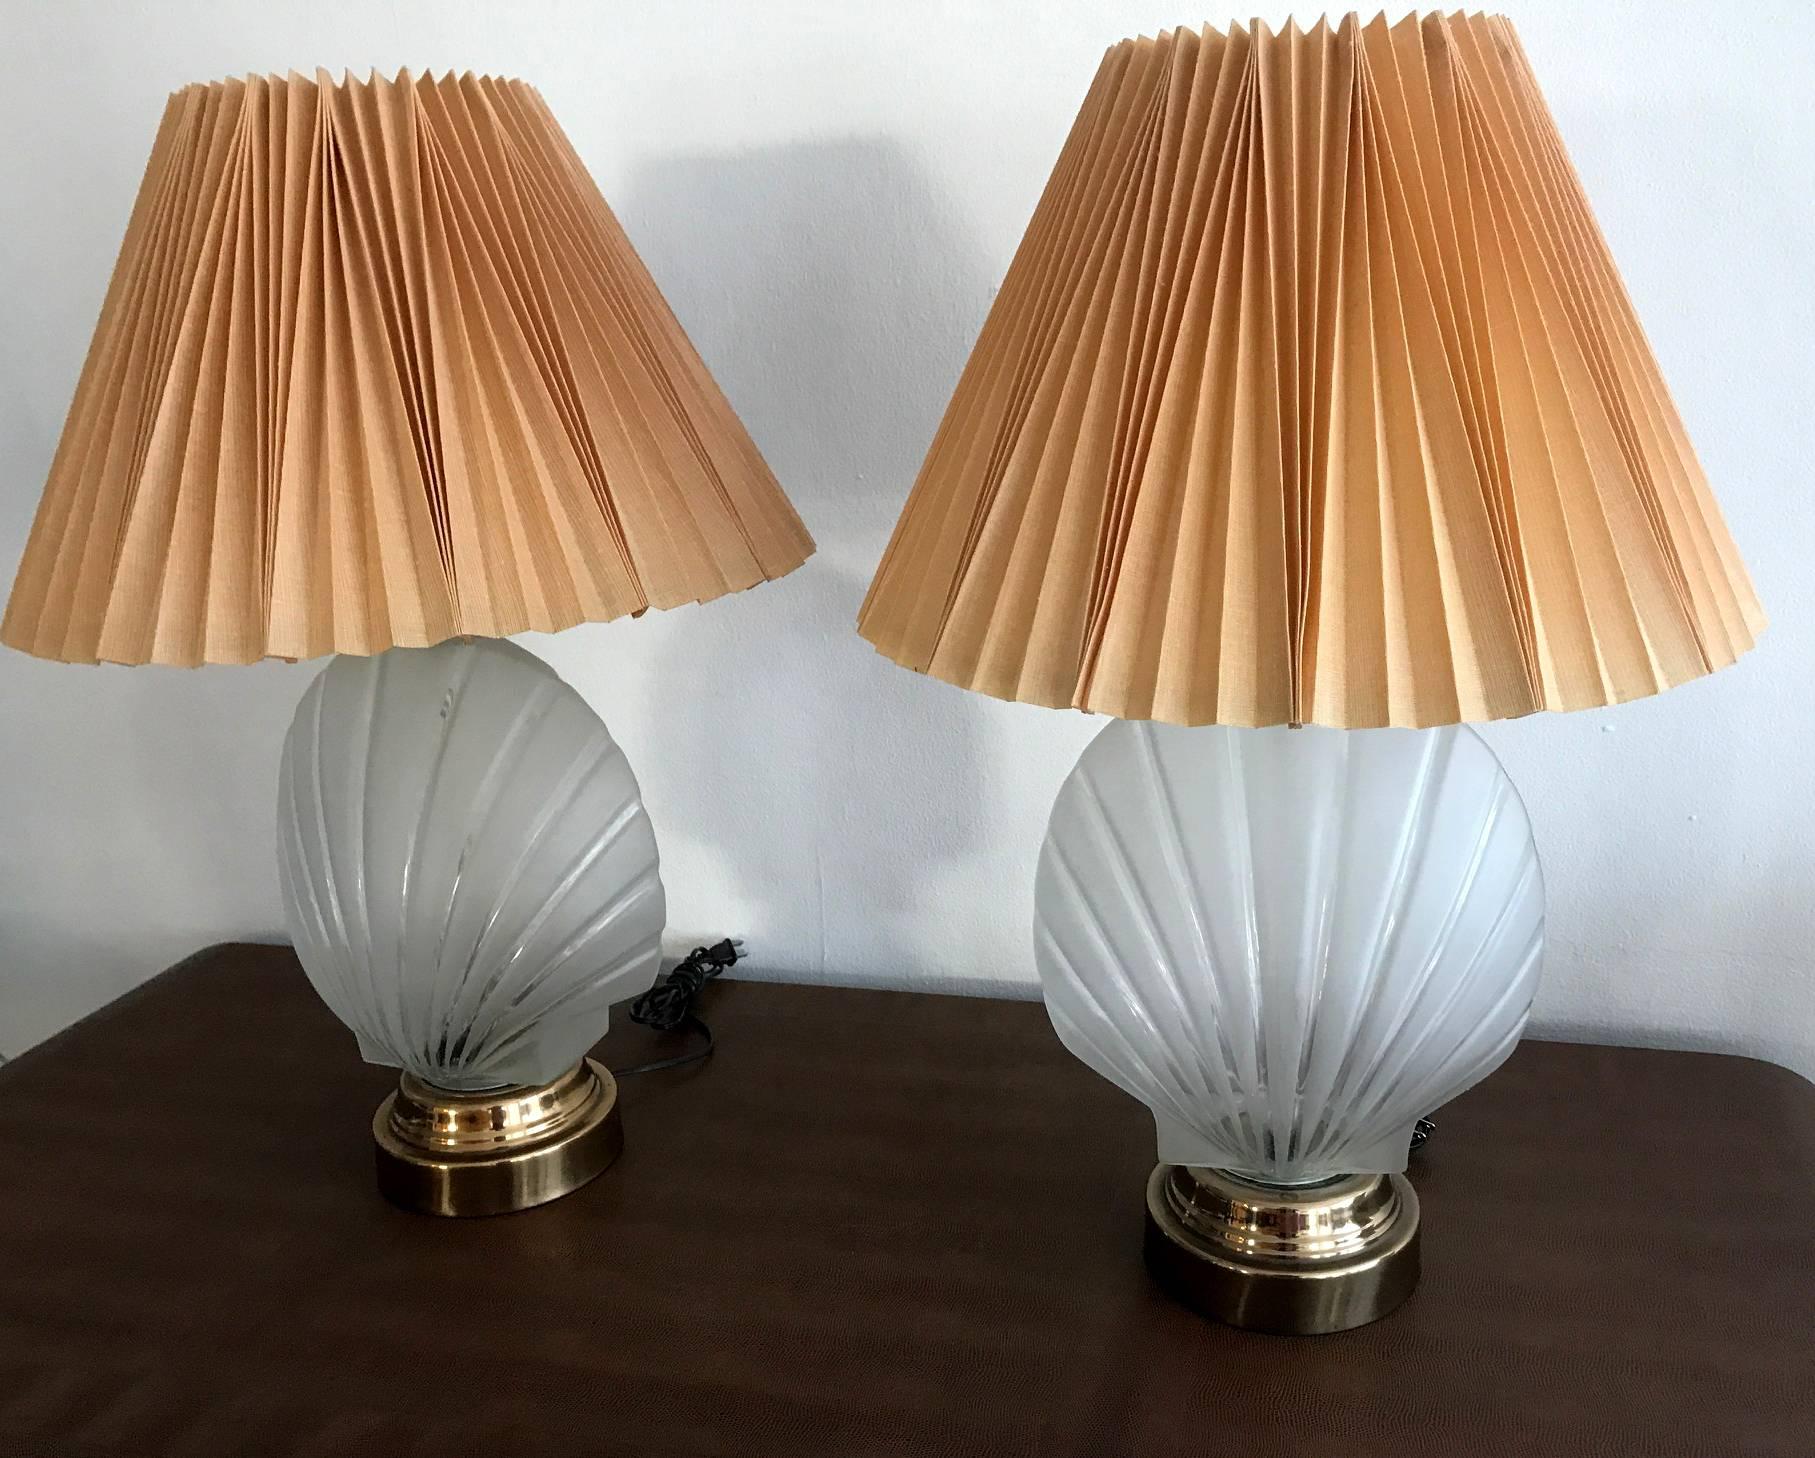 Very groovy and retro, this pair of table lamps features a frosted glass urn in a molded seashell form on polished brass base. The Classic ocean motif is given an spin in the Hollywood Regency fashion. The shades are very well designed in an